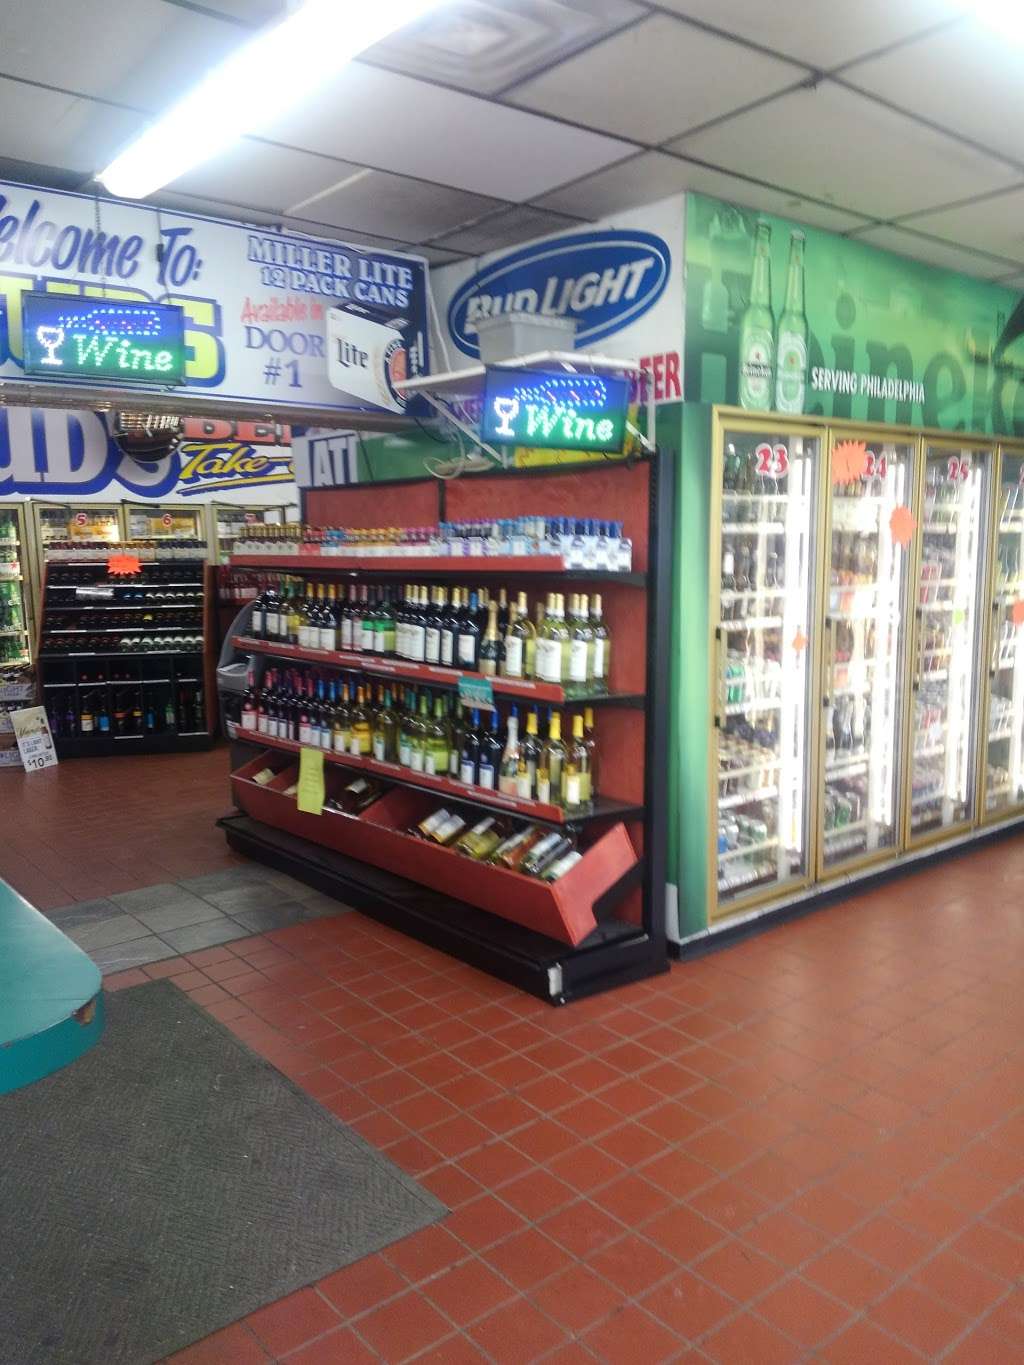 Suds Beer Store | 2401 Old Lincoln Hwy, Feasterville-Trevose, PA 19053 | Phone: (215) 638-9484